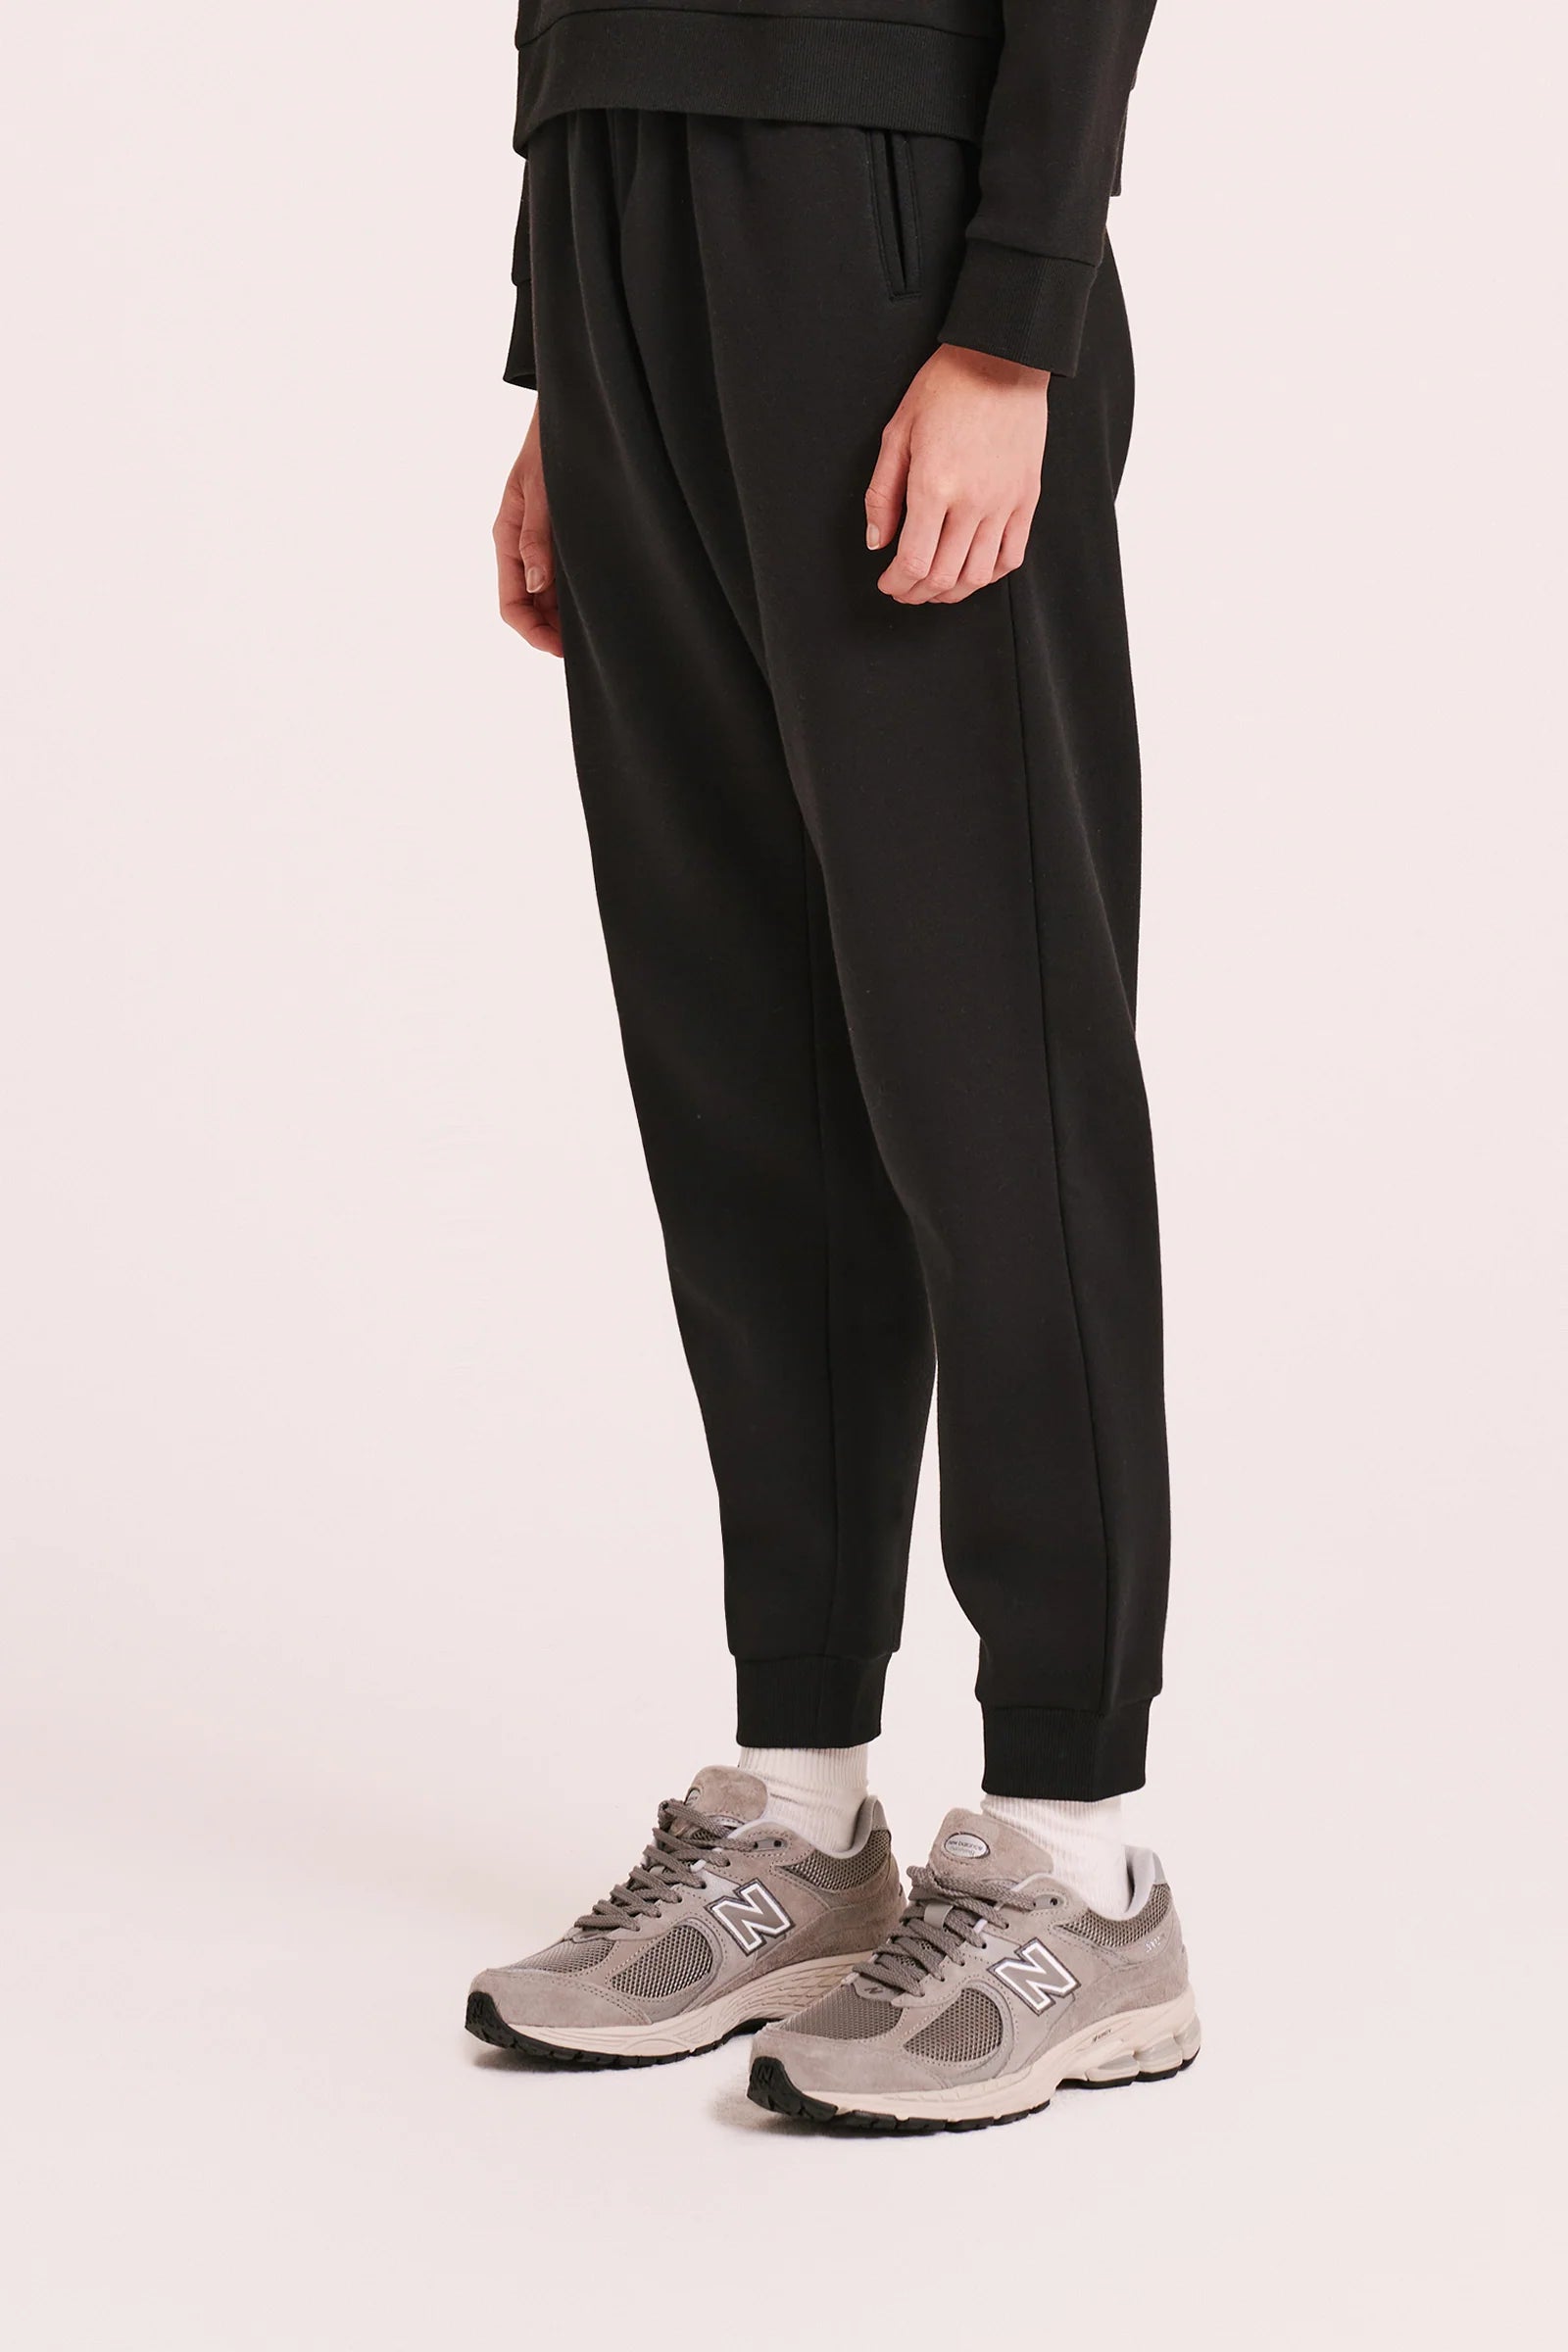 Nude Lucy | Carter Classic Trackpant - Black